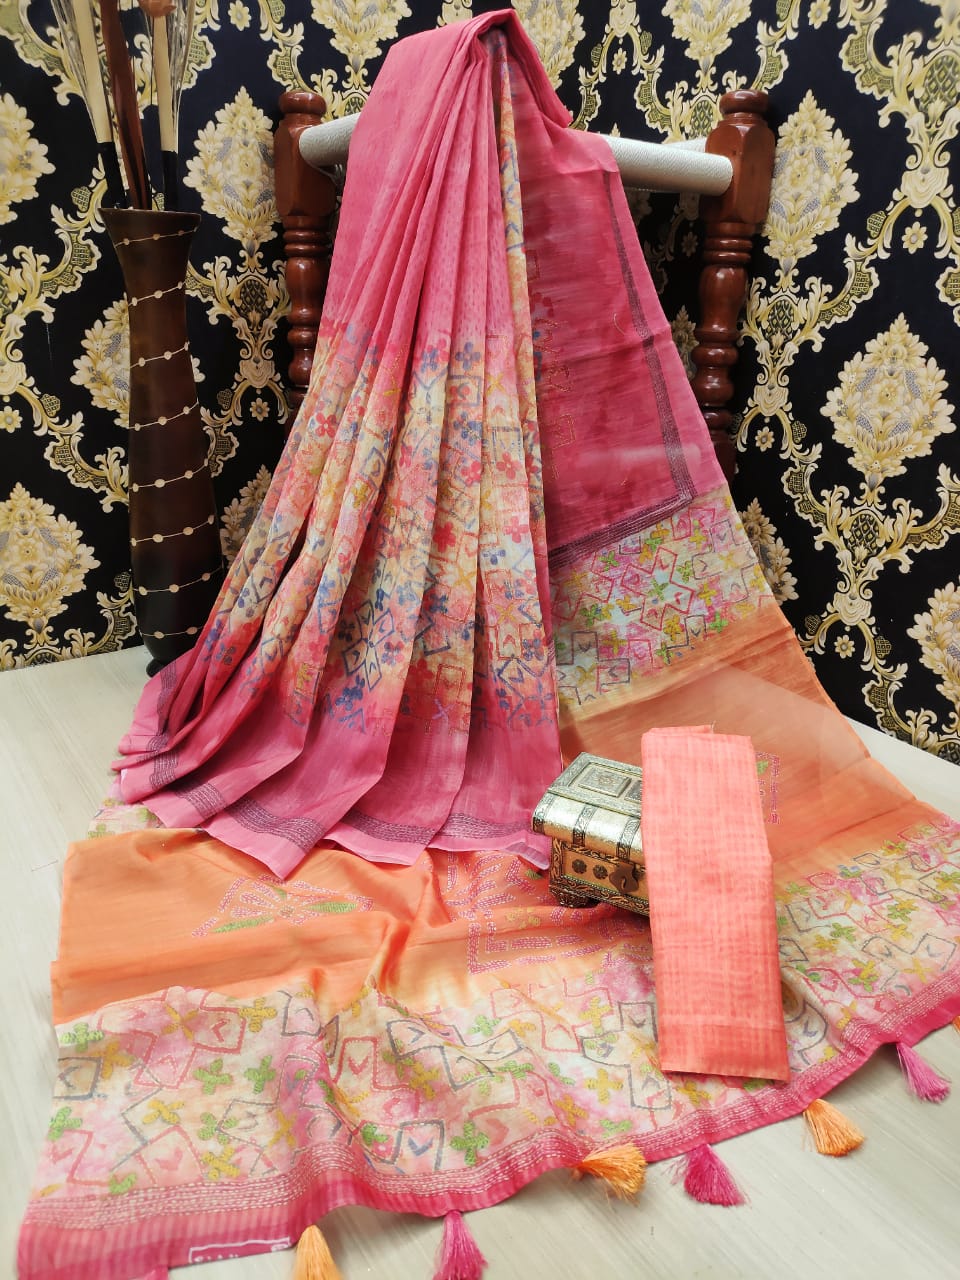 Siddharth Silk Mills Digital Corial Linen At Affordable Price In Surat Textile Market